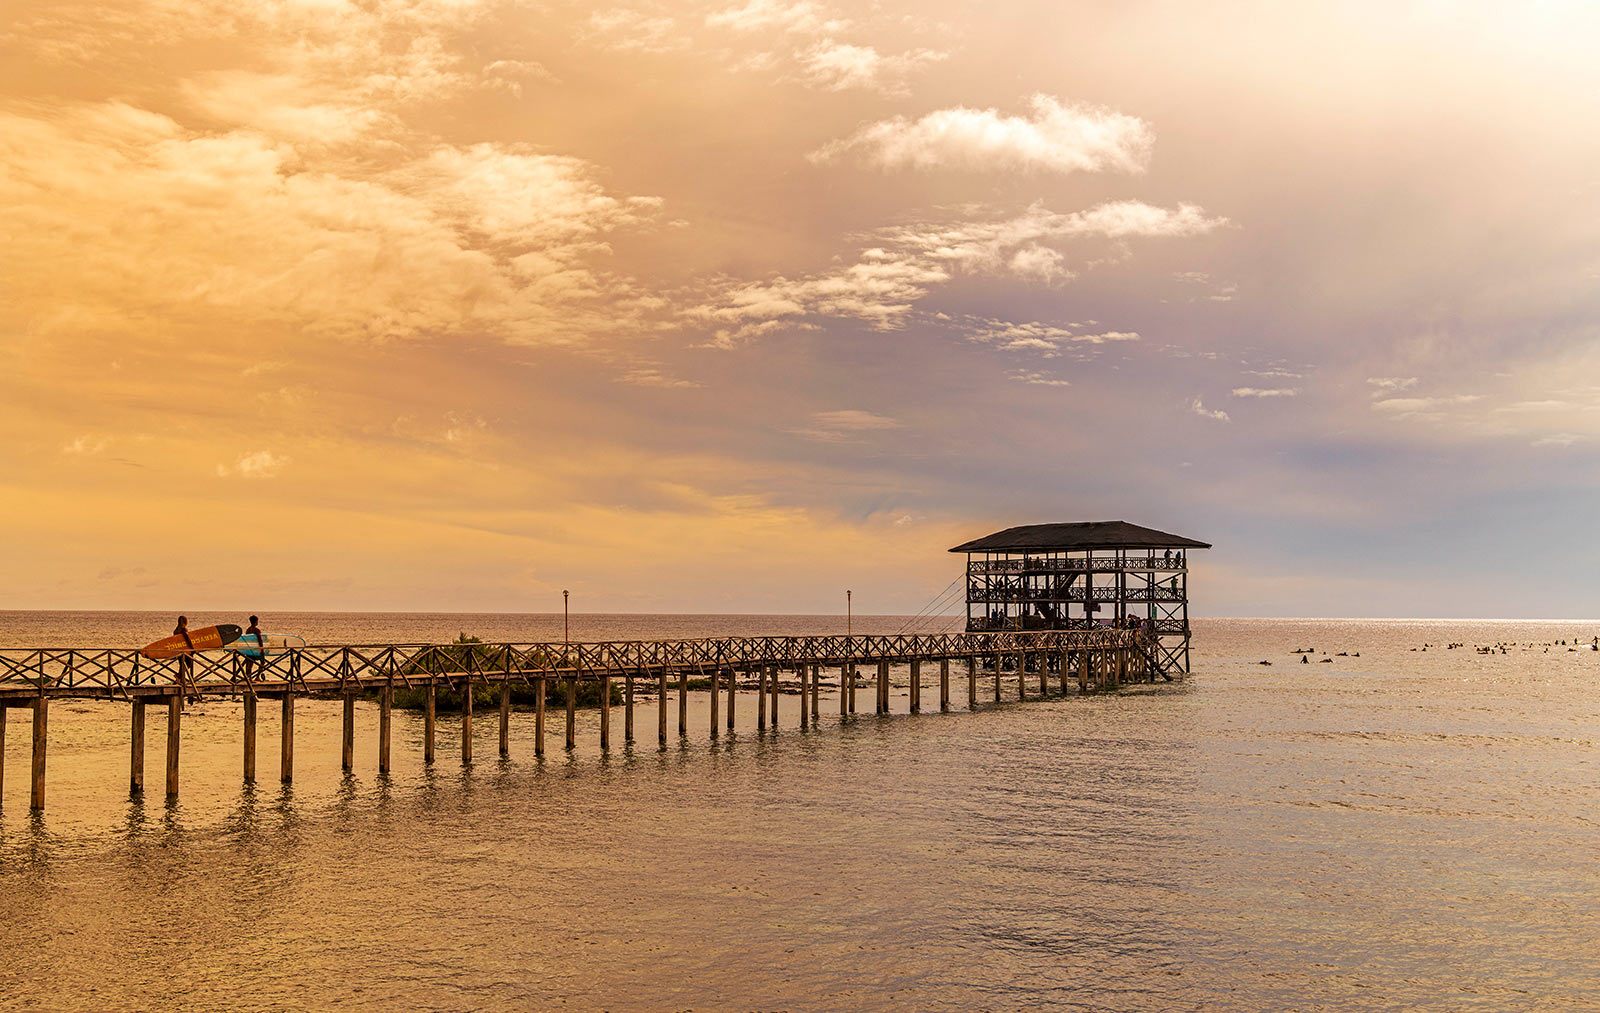 The pier at Cloud 9 beach in Siargao, Philippines